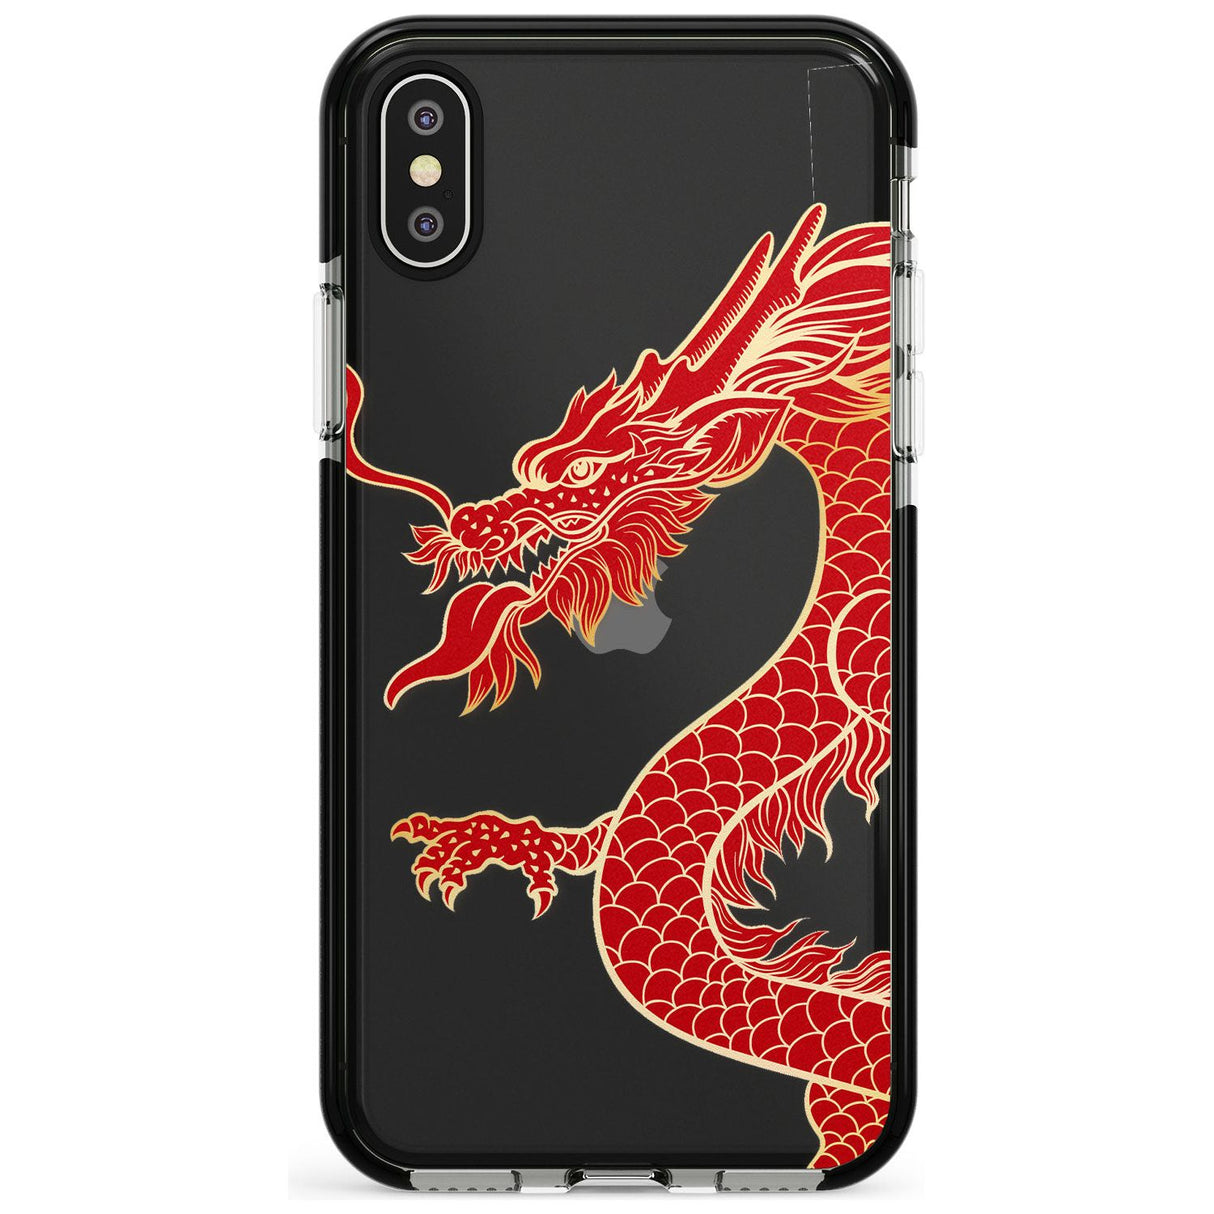 Large Black Dragon Black Impact Phone Case for iPhone X XS Max XR